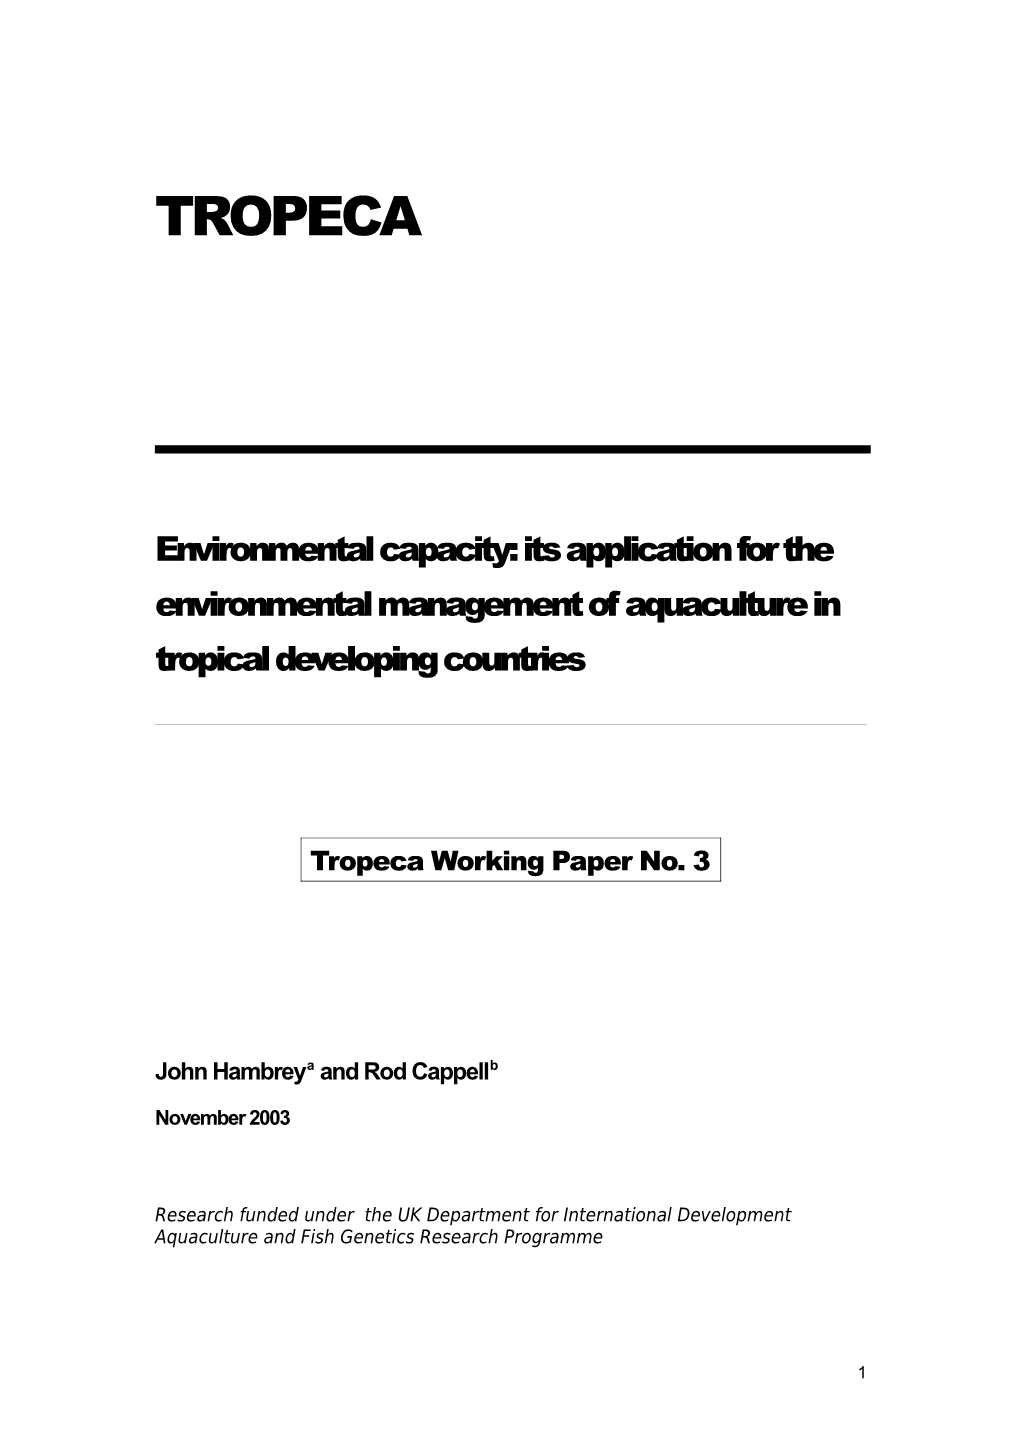 The Application of Environmental Capacity in Tropical Aquaculture